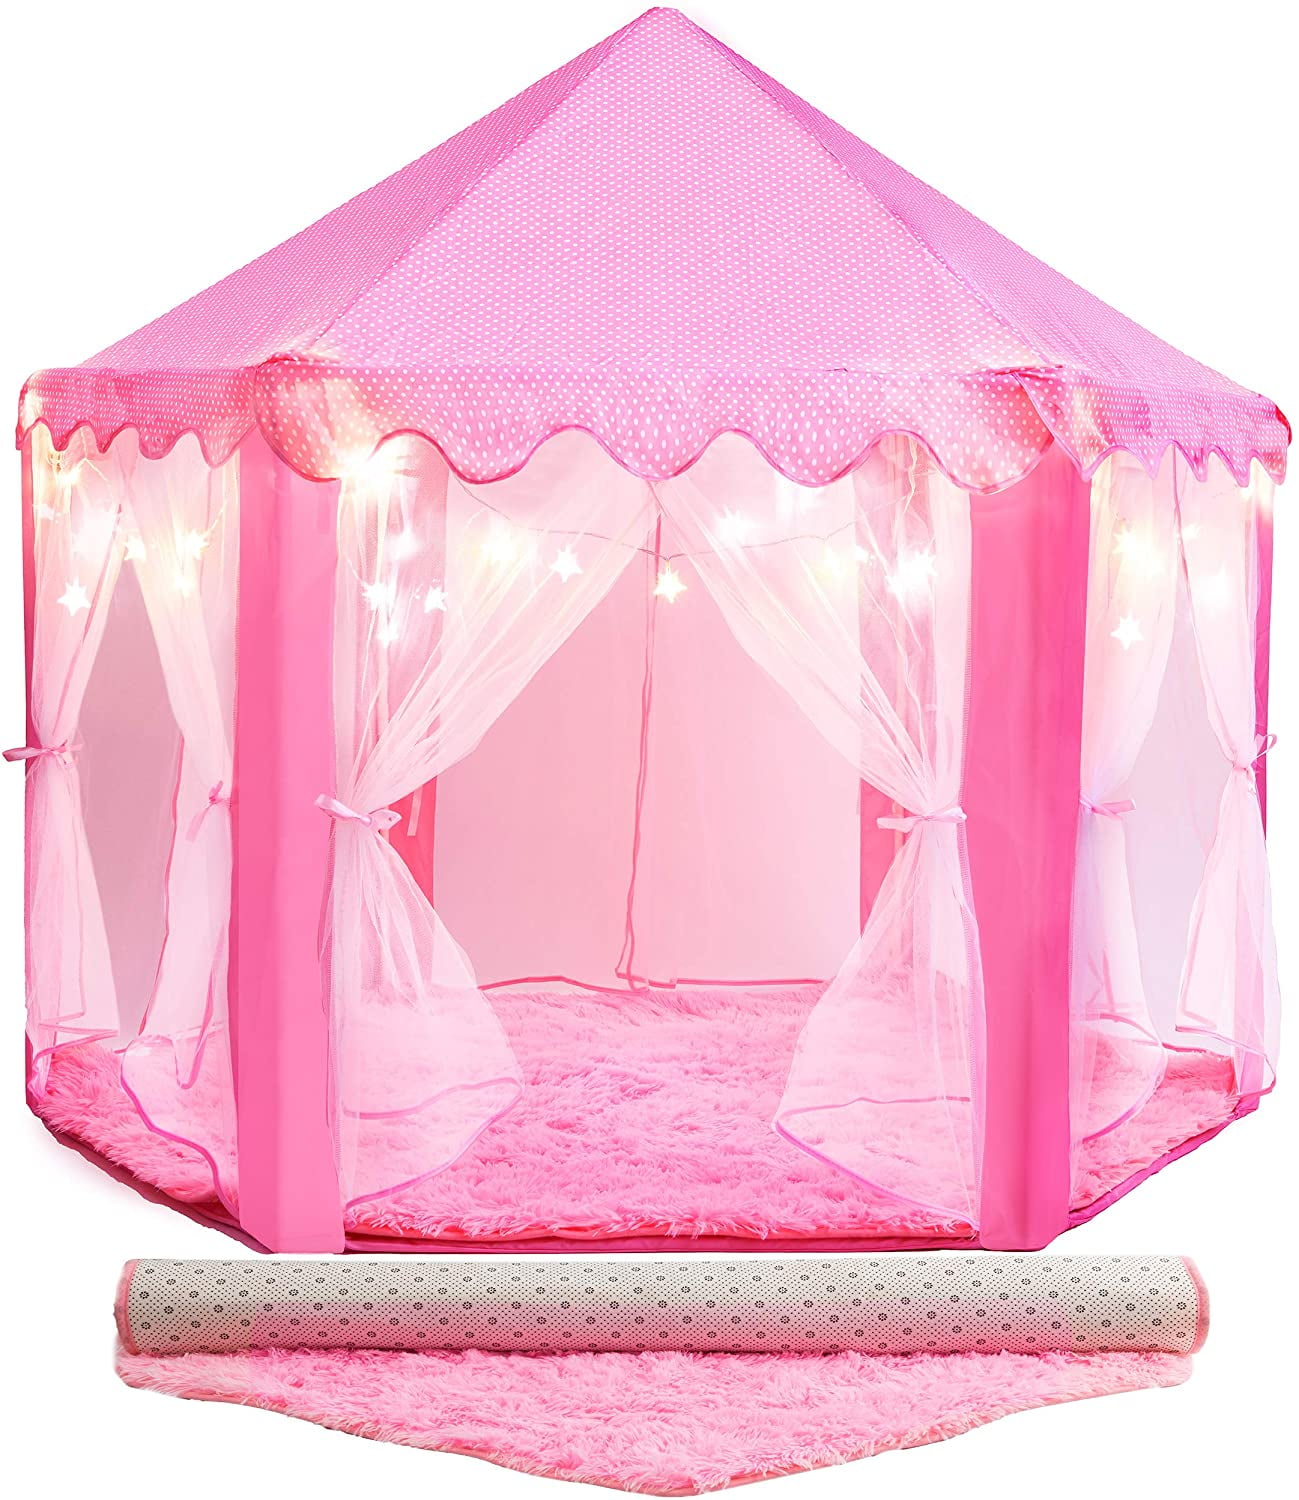 Tent Princess Castle Play Indoor Outdoor Playhouse Beach Fancy Interesting Worth for sale online 